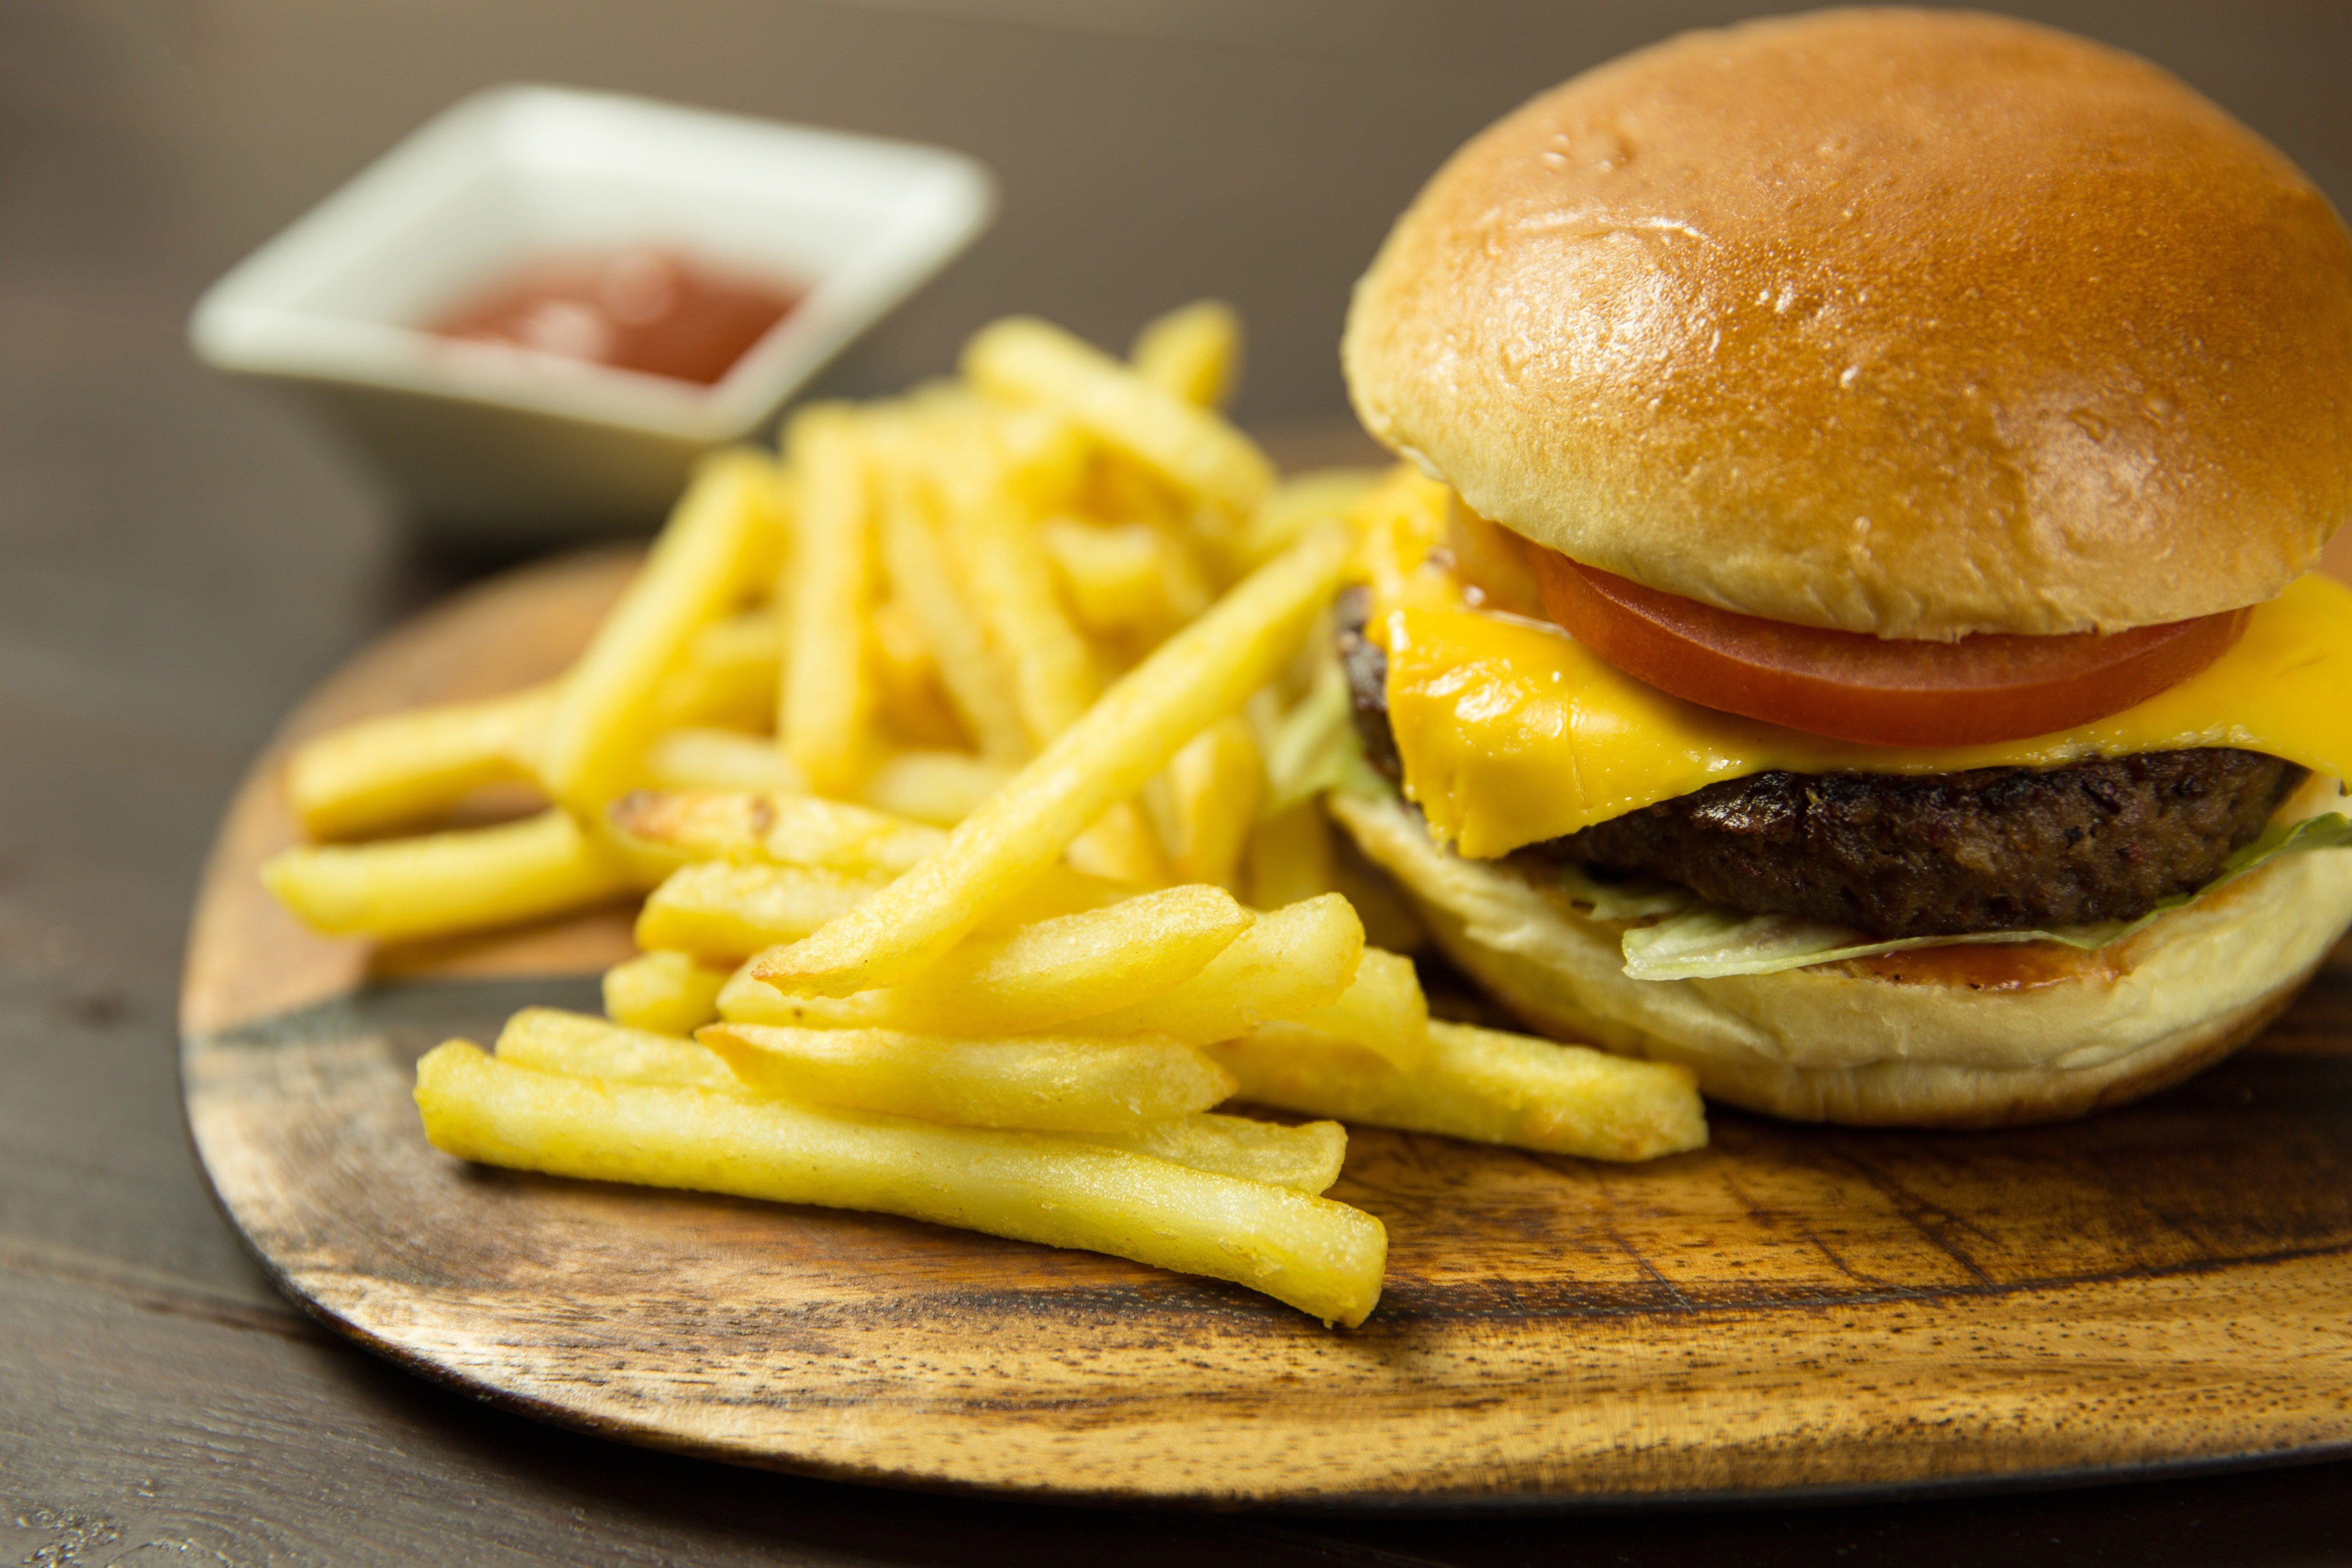 Adam ate fast food for an entire week, which made his stomach hurt. | Source: Pexels